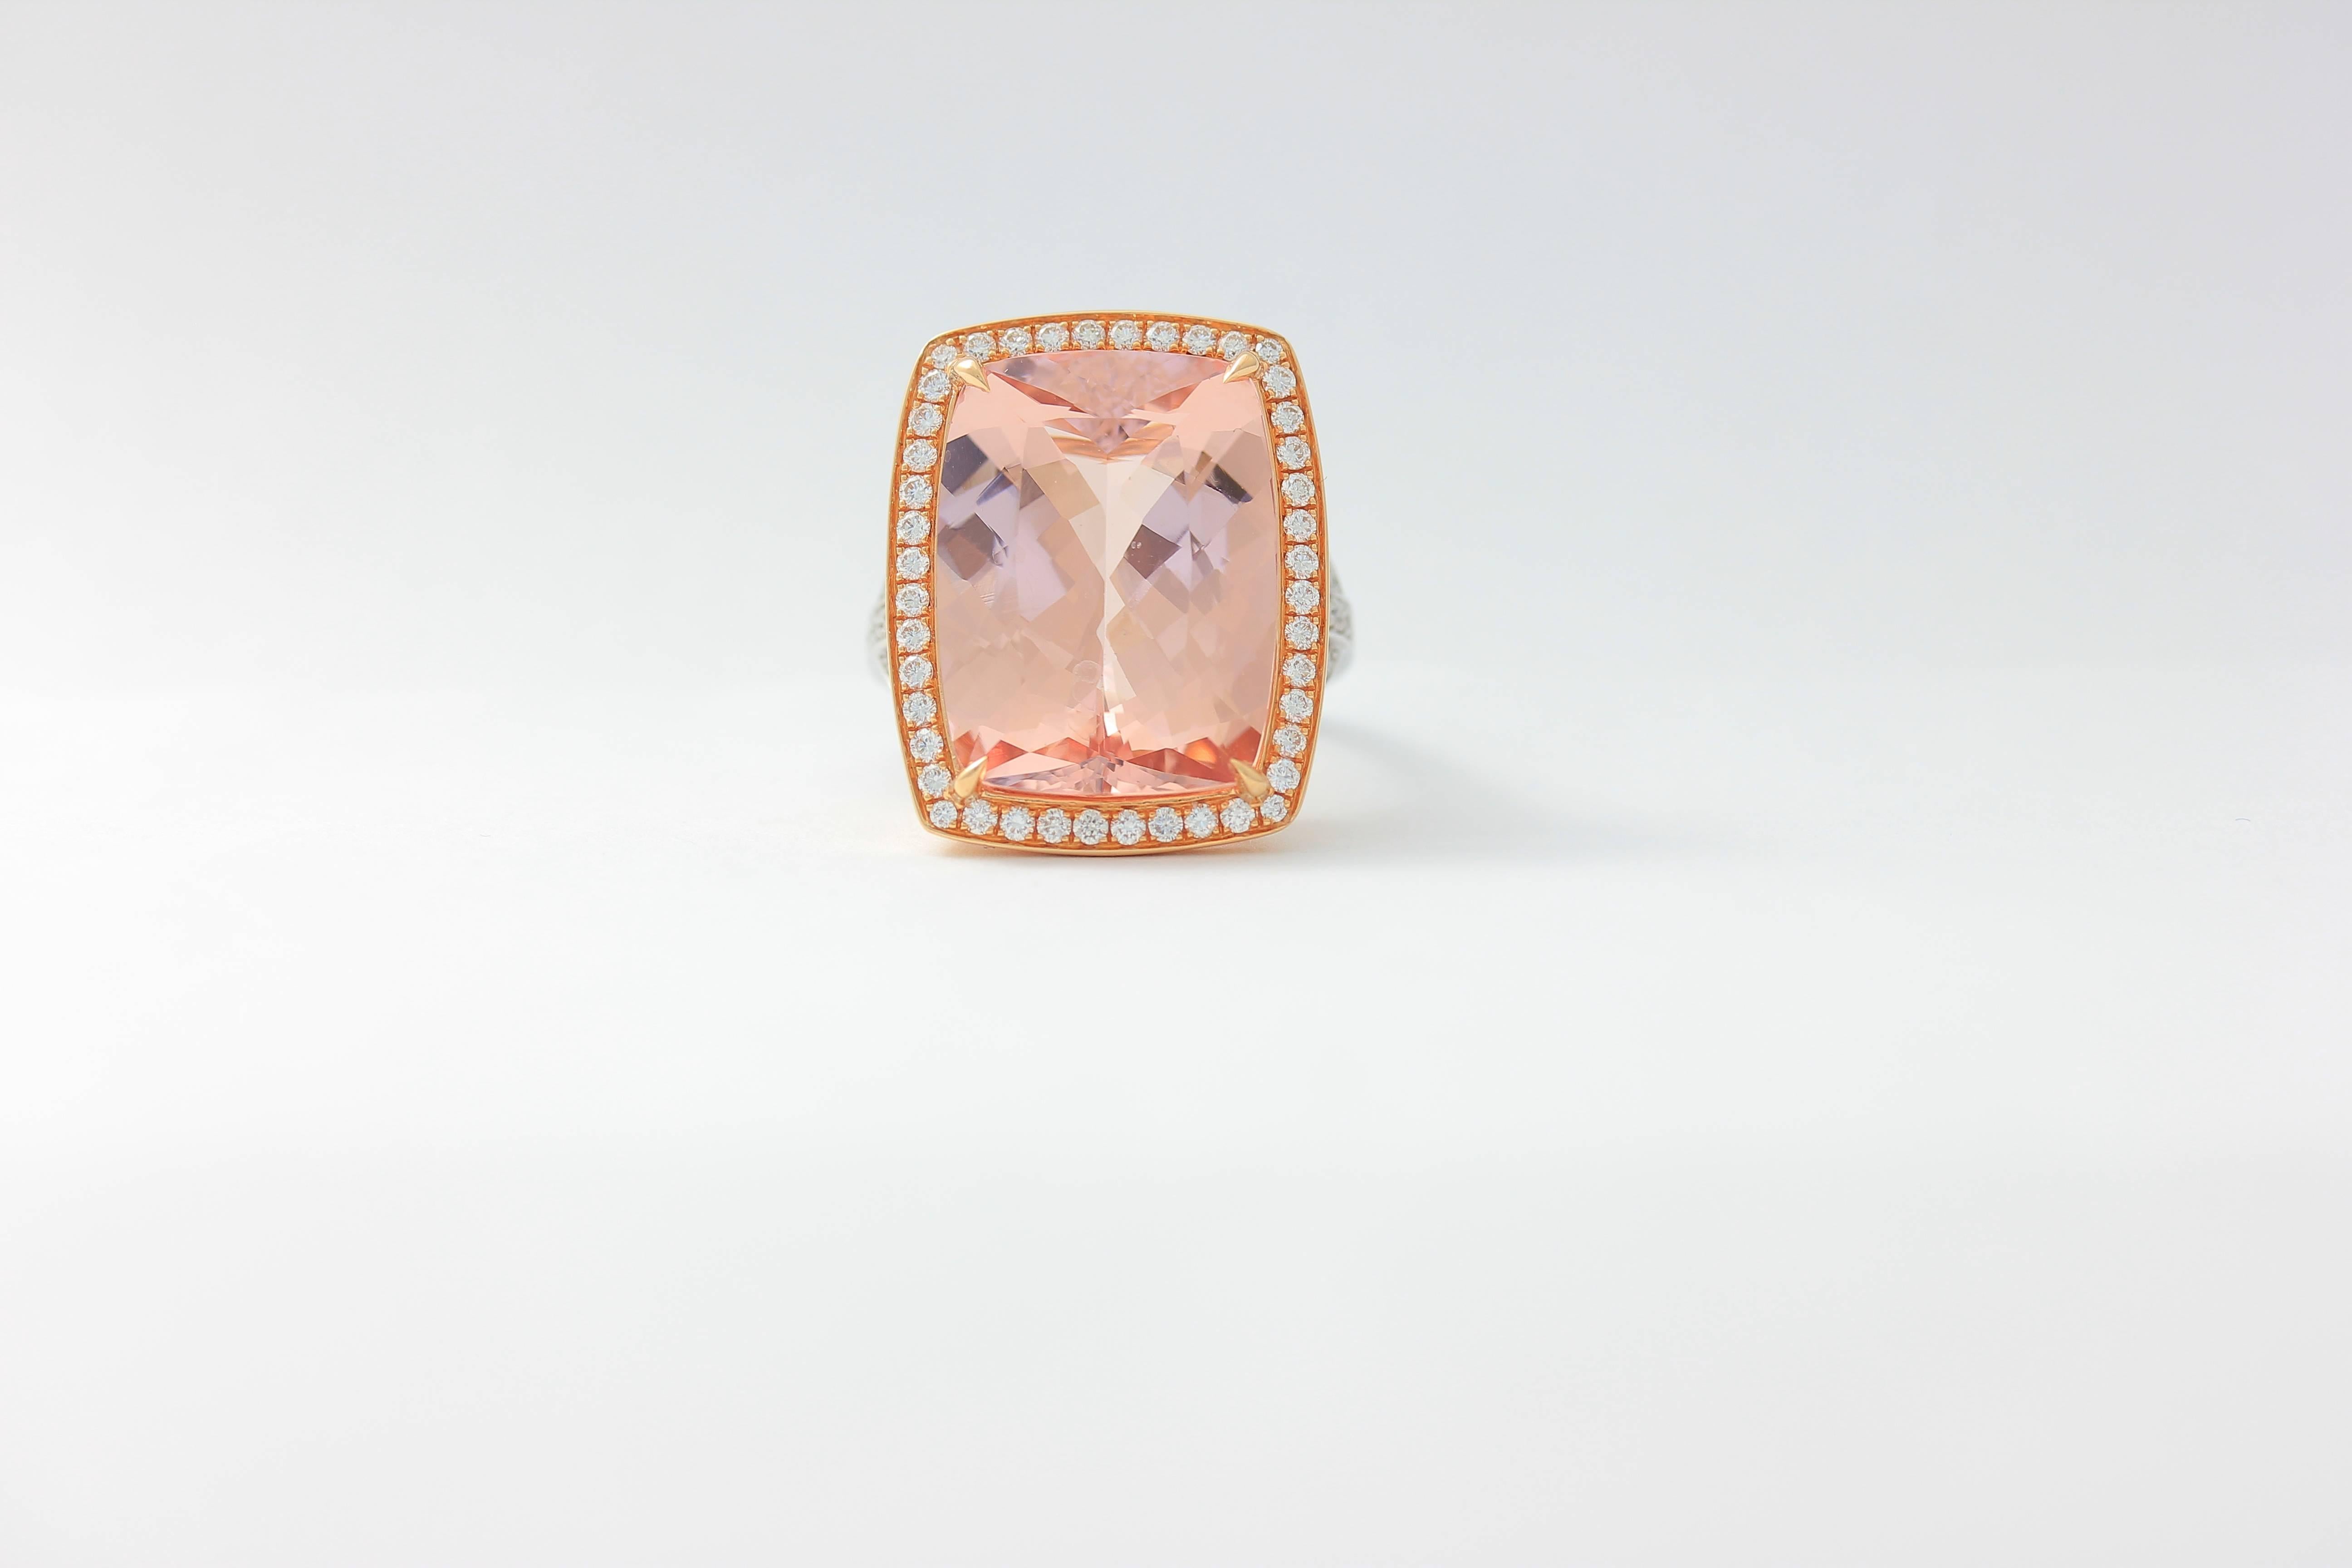 14K Pink and White Gold One-Of-A-Kind Morganite Ring

Total Diamond weight is approximately 0.81CT

Total Morganite weight is approximately 18.13